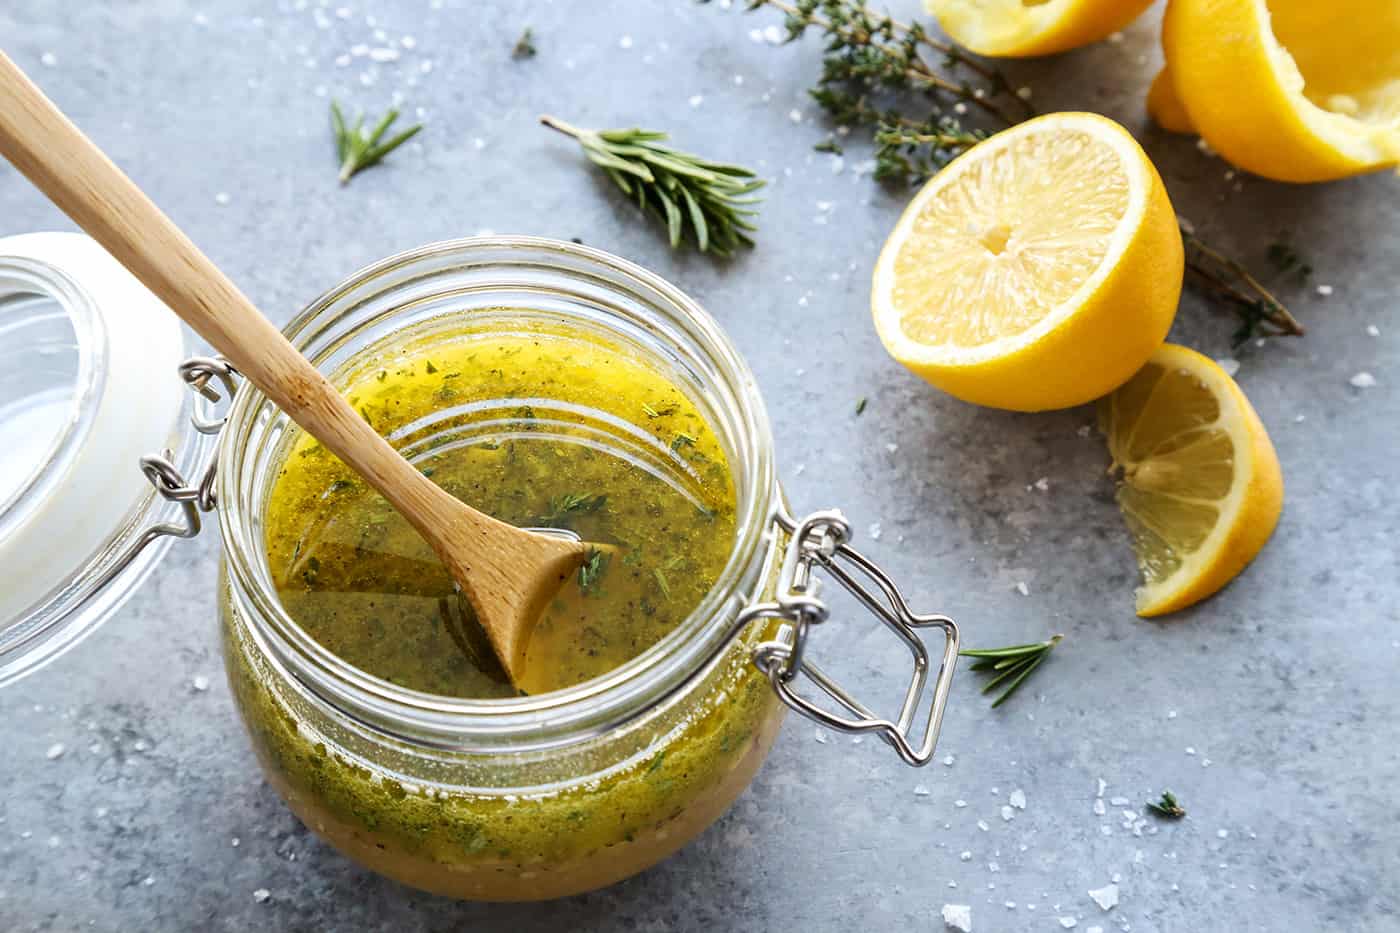 A small jar of homemade lemon herb vinaigrette with a wooden spoon